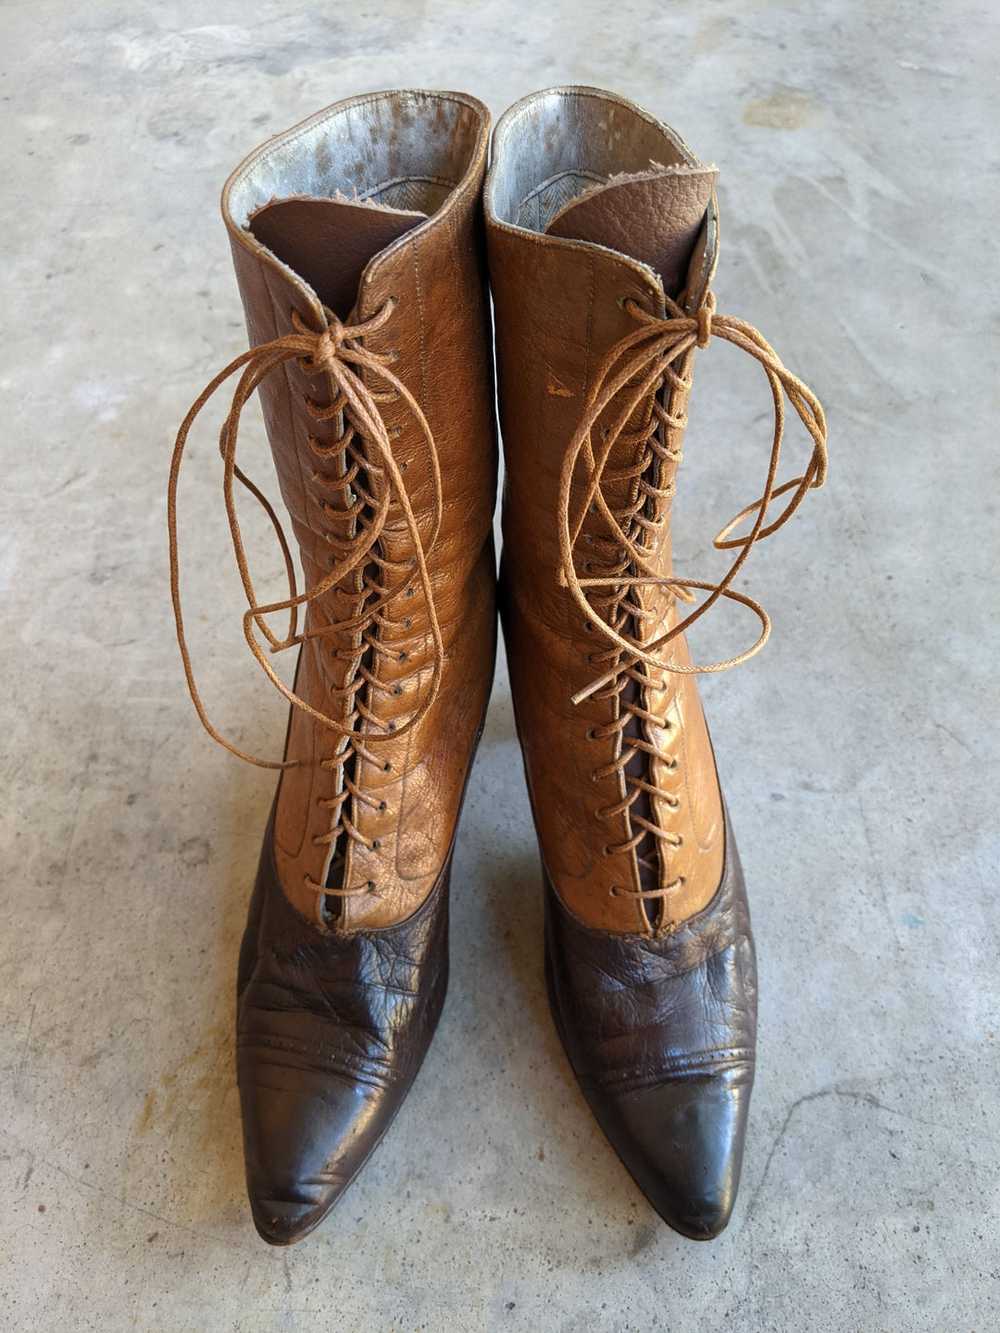 c. 1910s-1920s Two-Tone Brown Boots | Approx Sz 6 - image 4